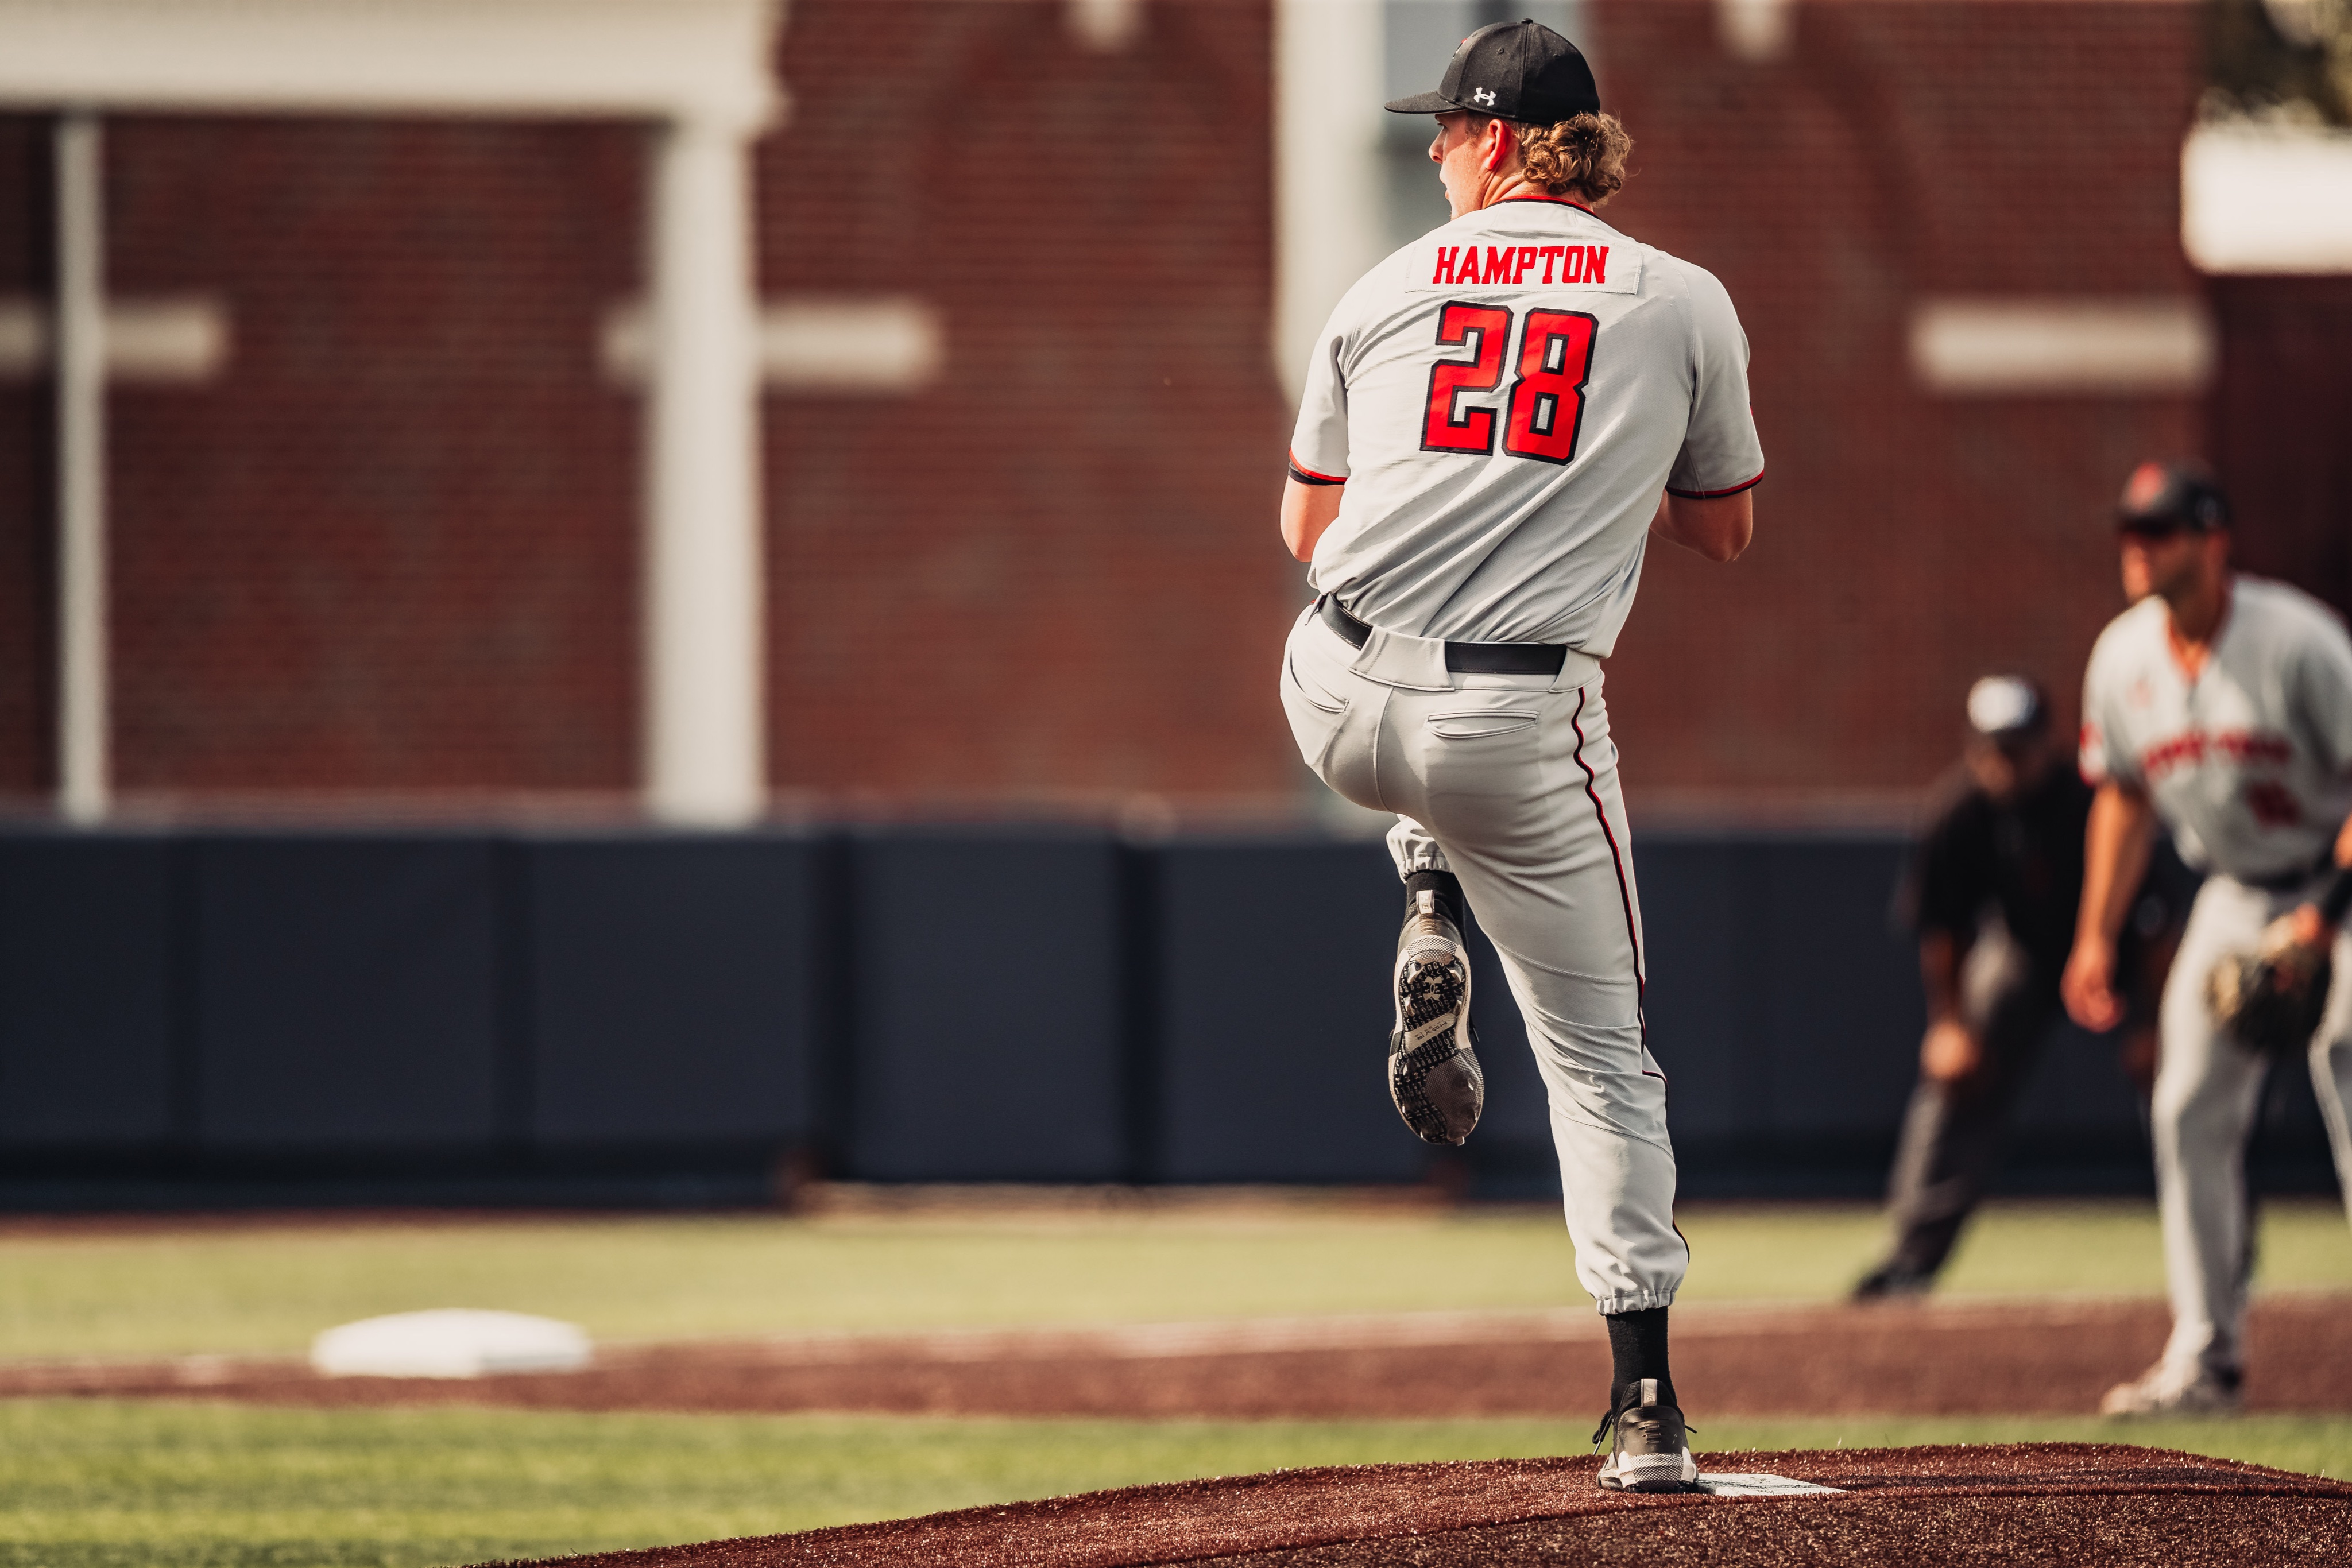 Texas Tech's Chase Hampton delivers a pitch